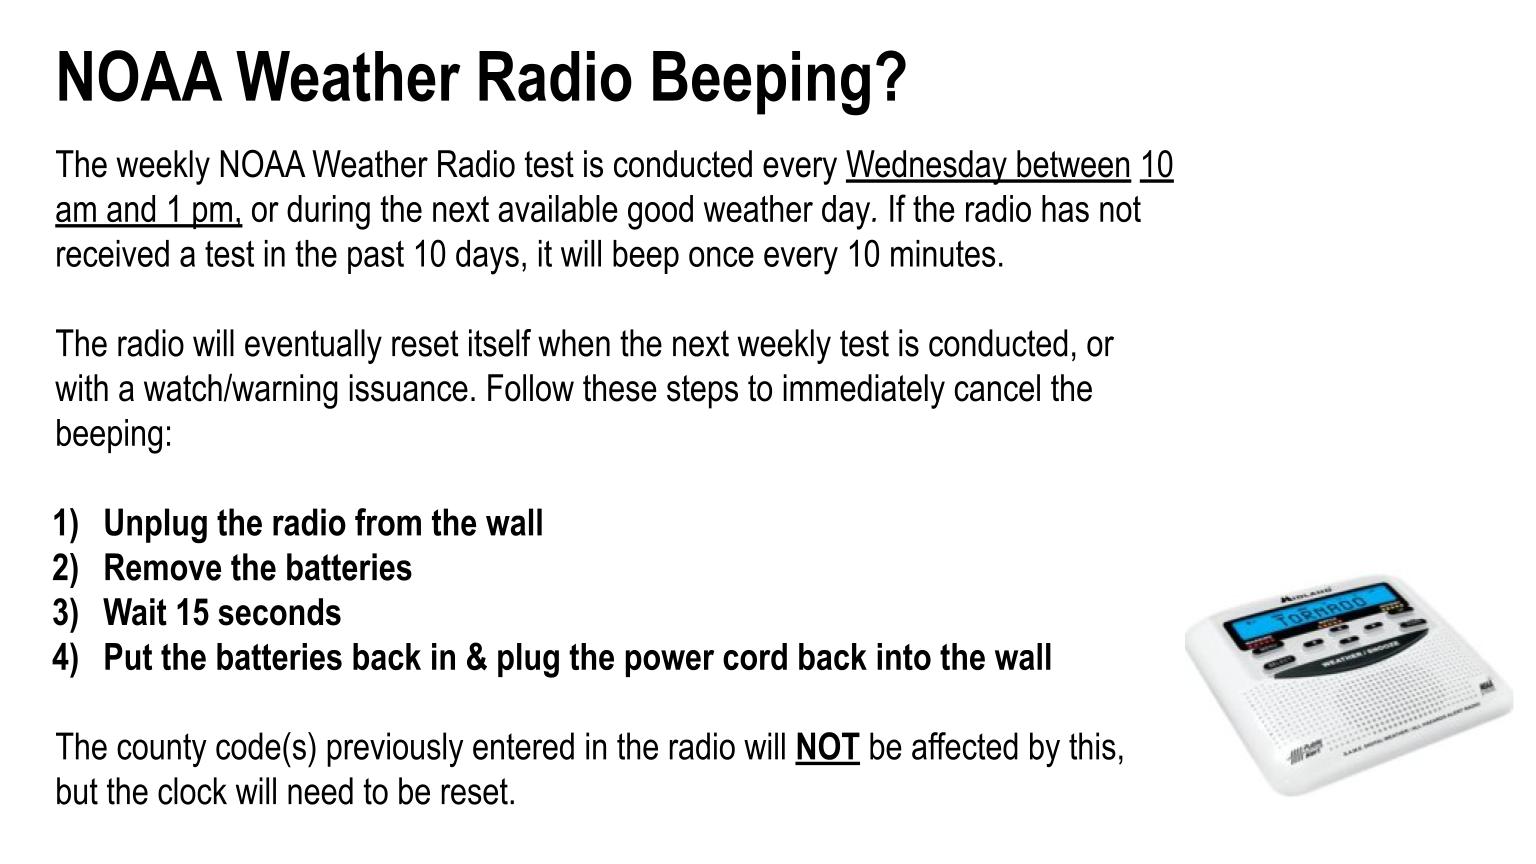 Champaign NOAA Weather Radio outage information